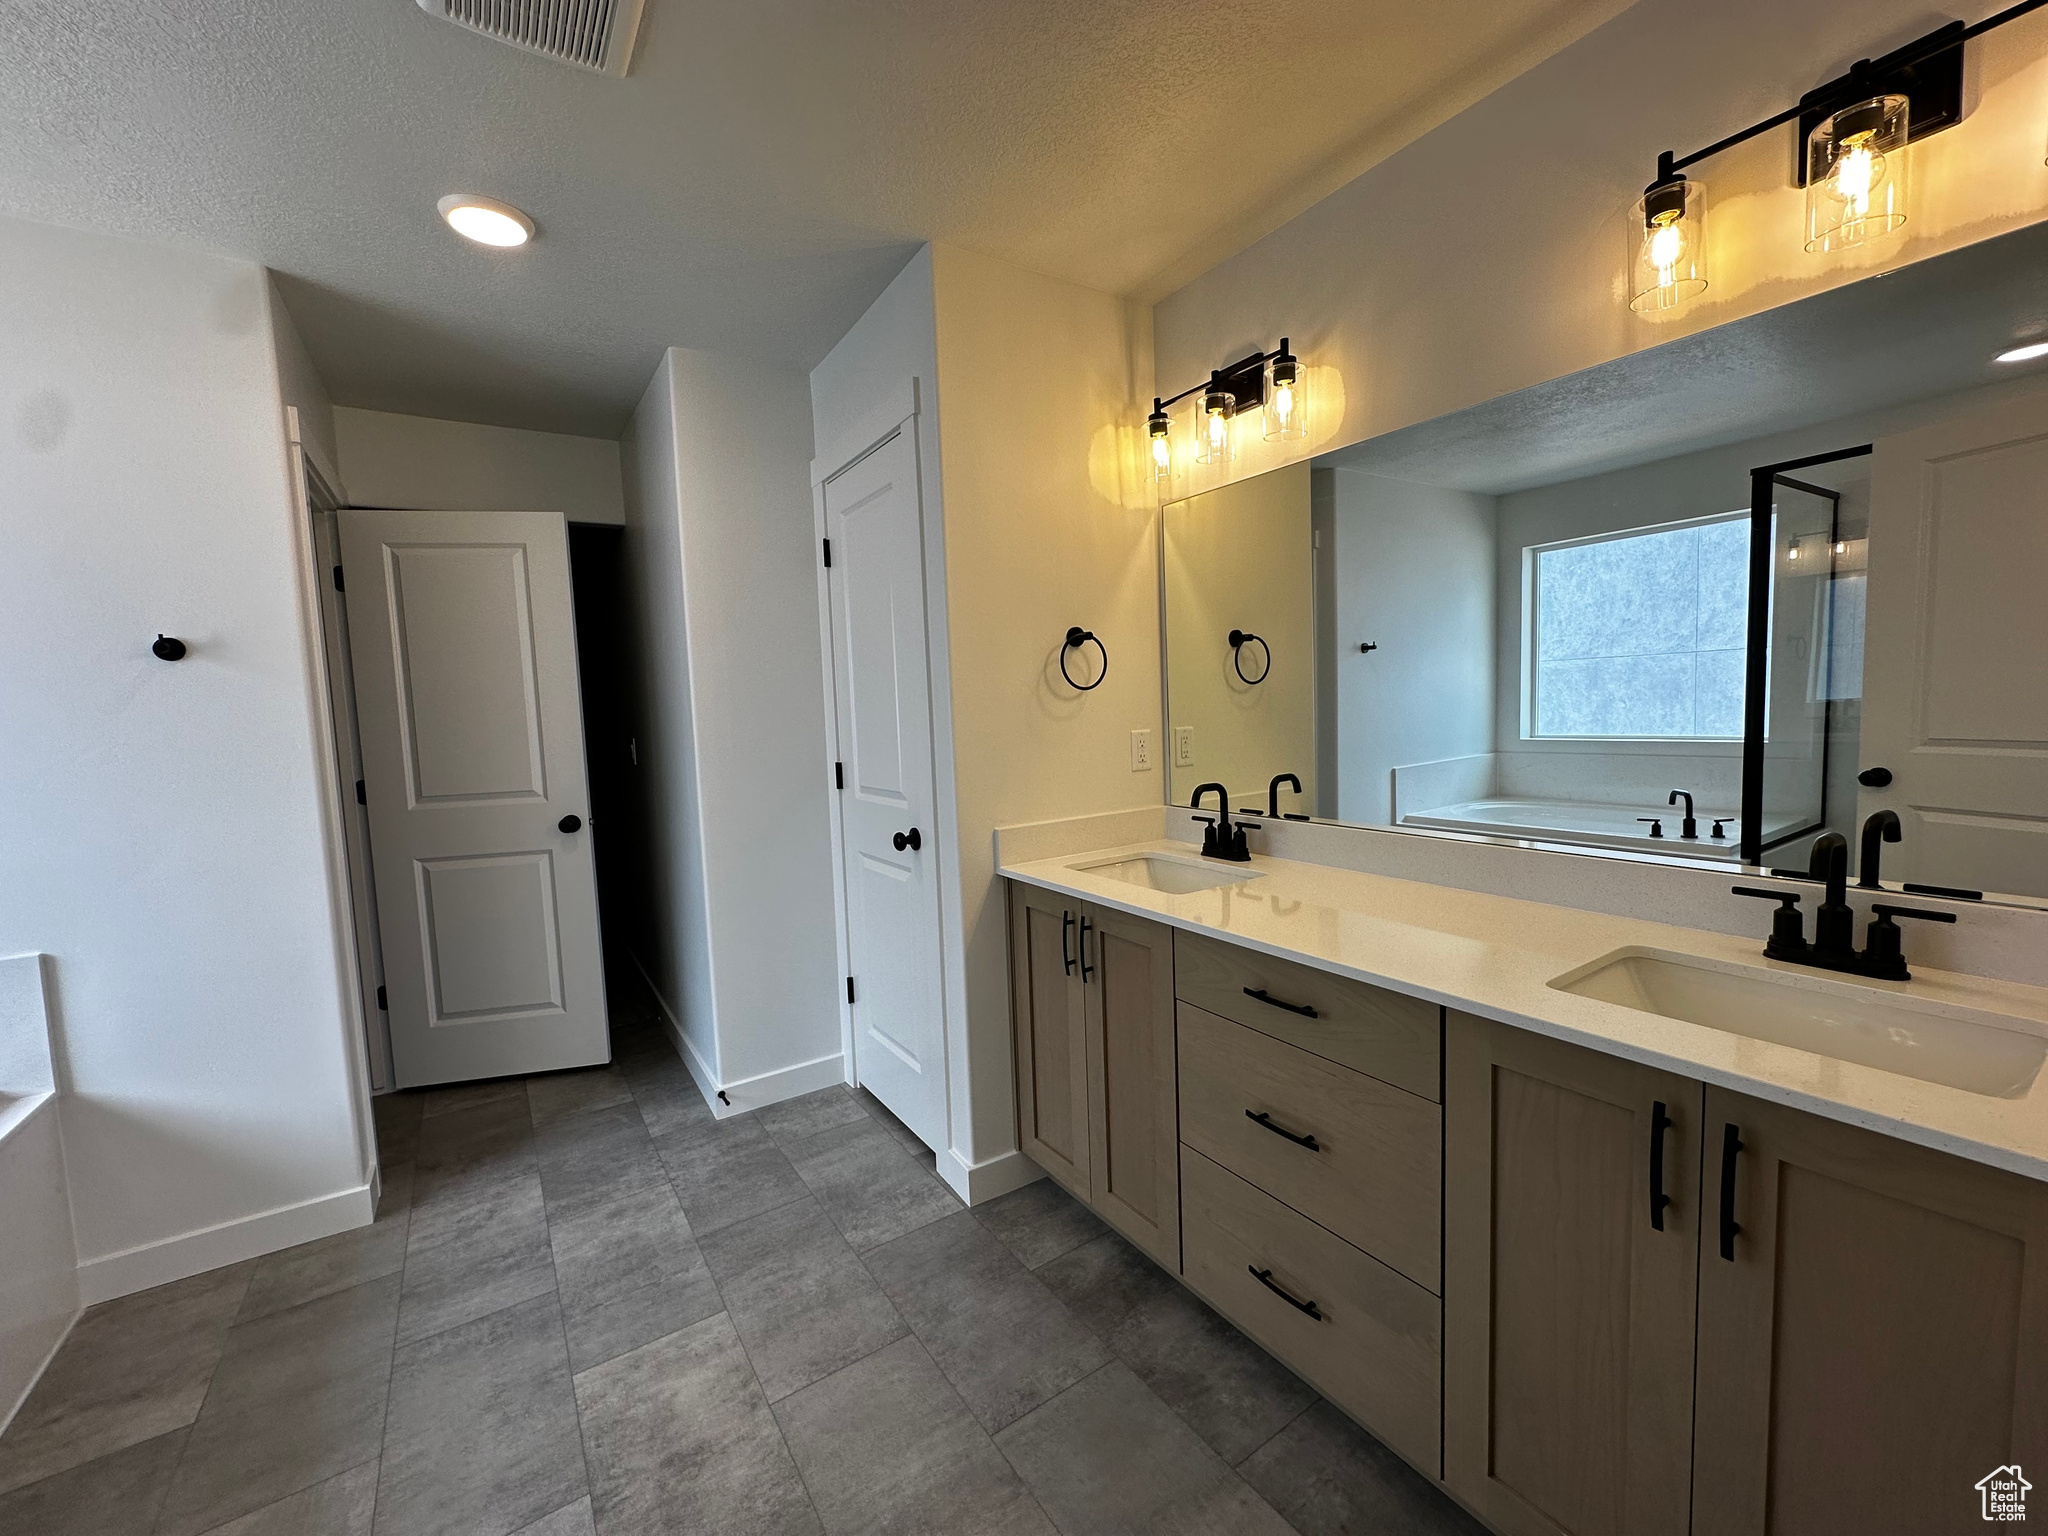 Bathroom featuring tile flooring, double vanity, a bath to relax in, and a textured ceiling